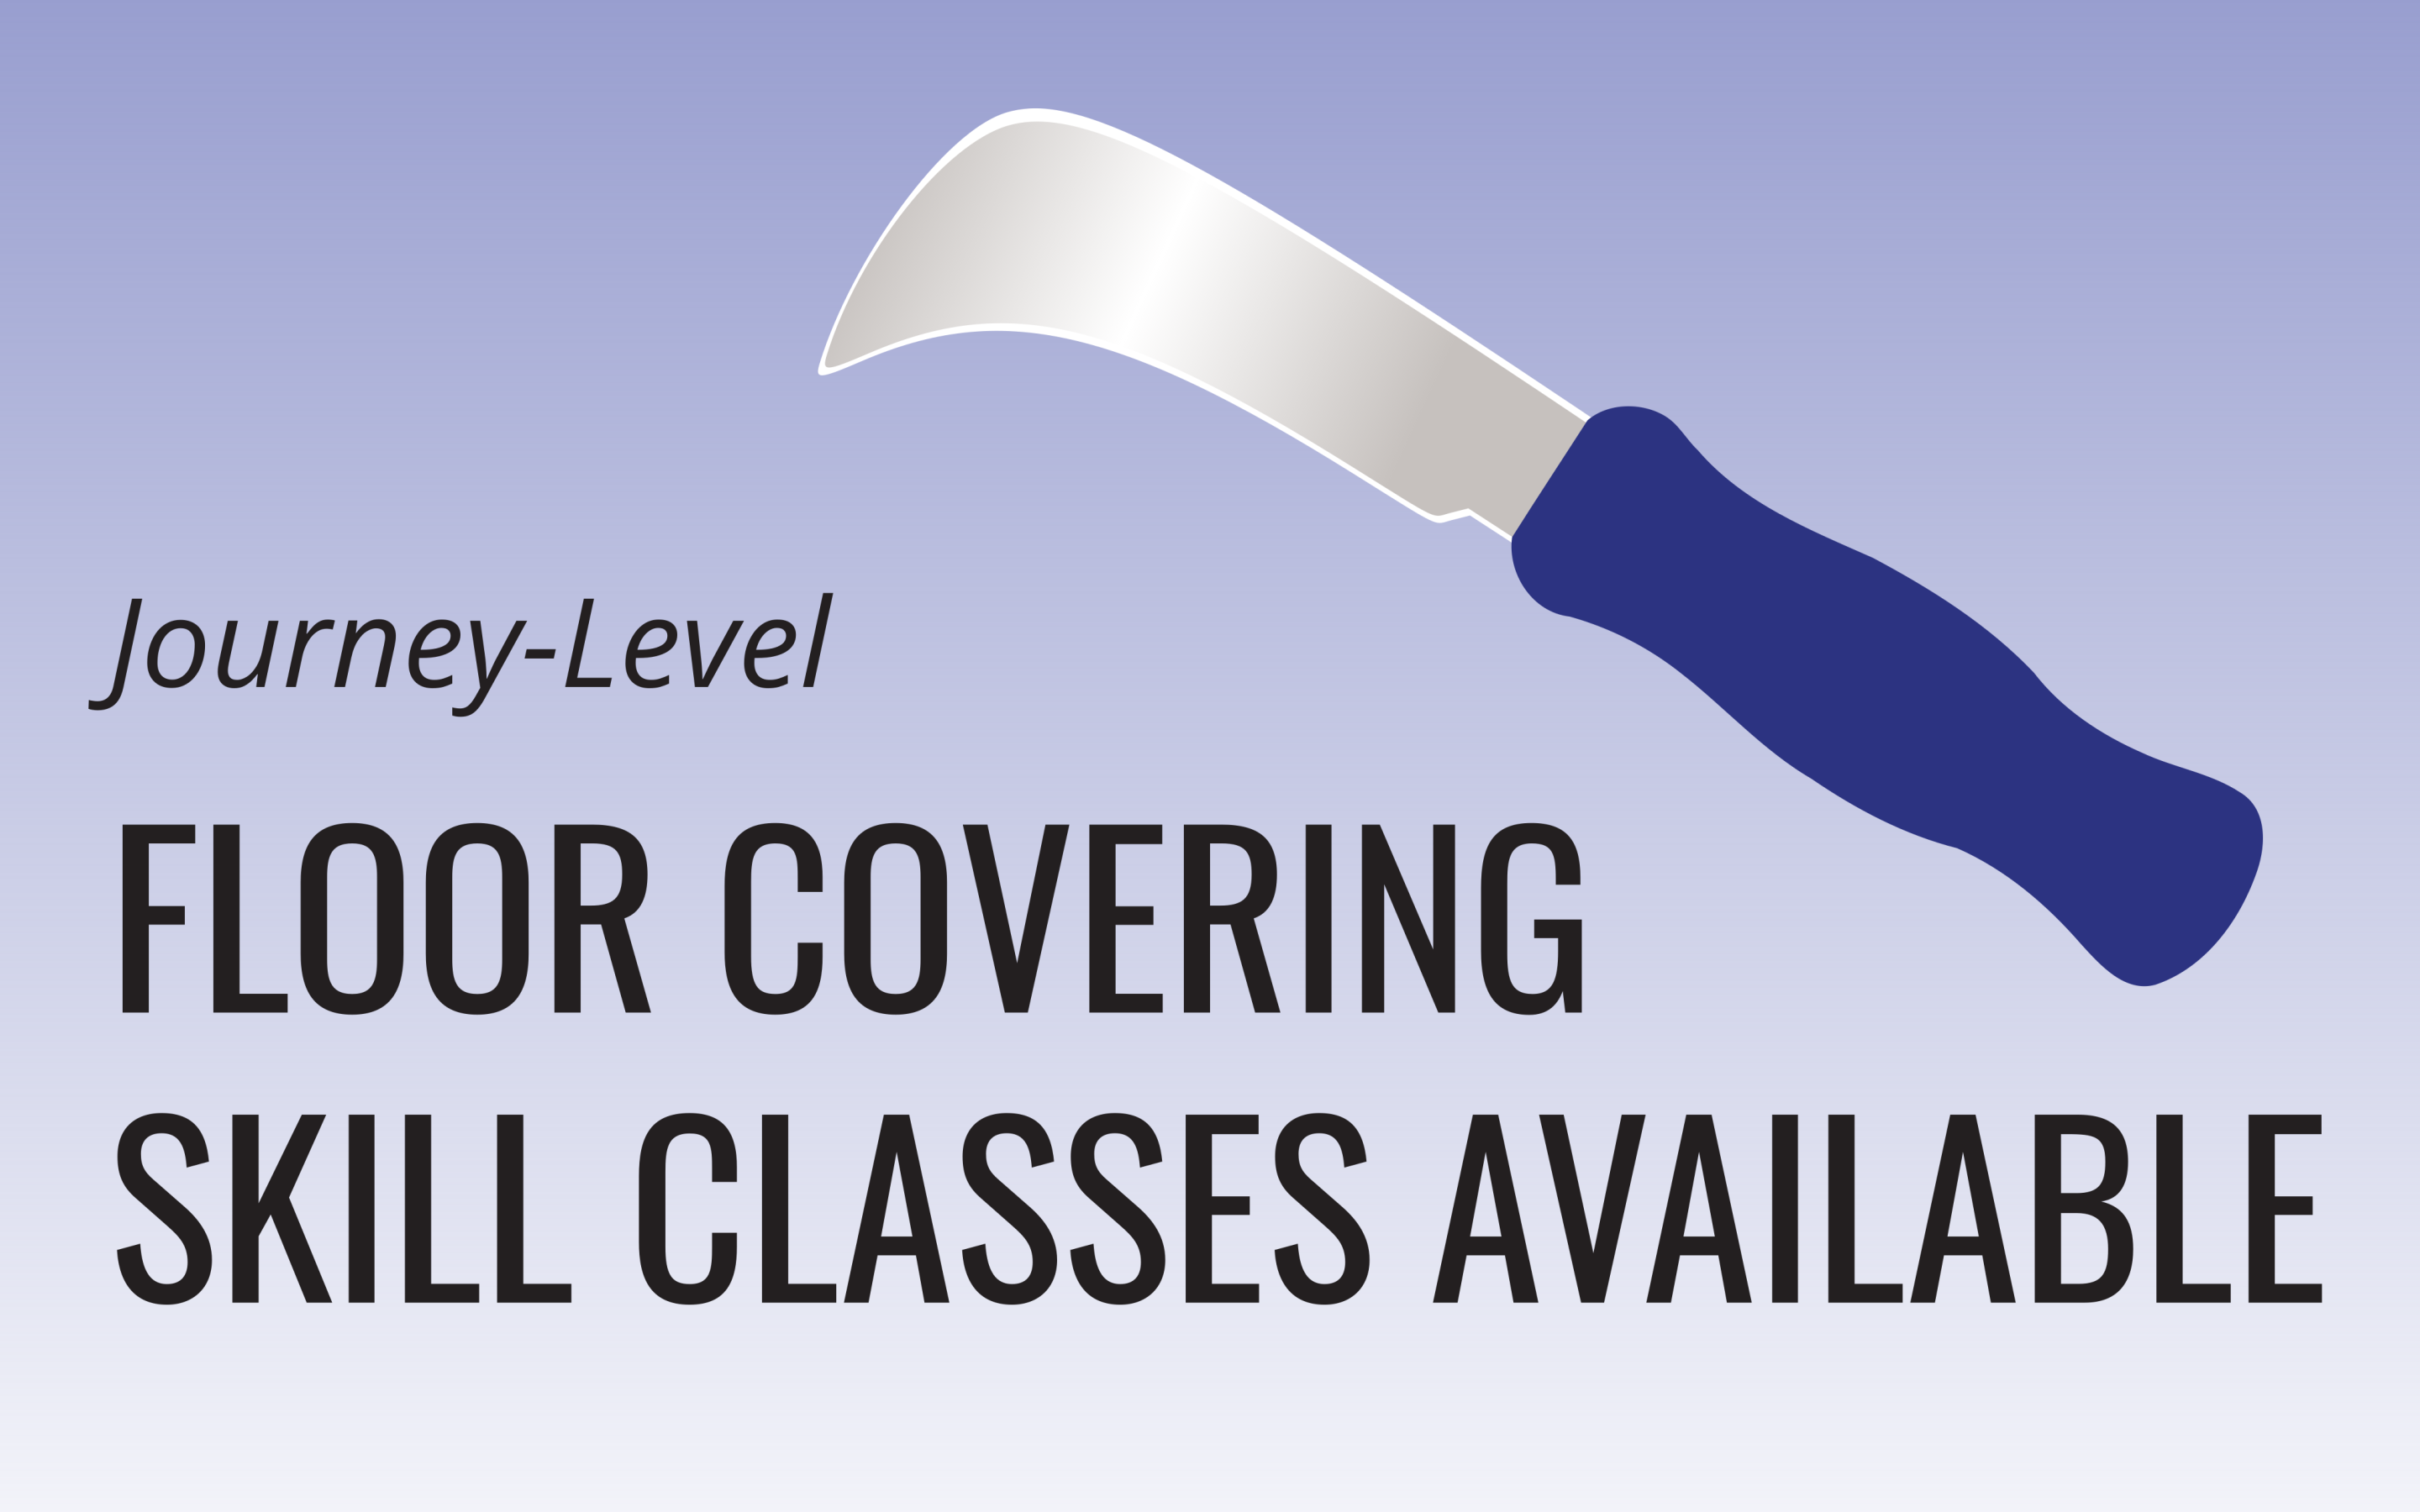 Journey-Level Floor Covering Skill Classes Available